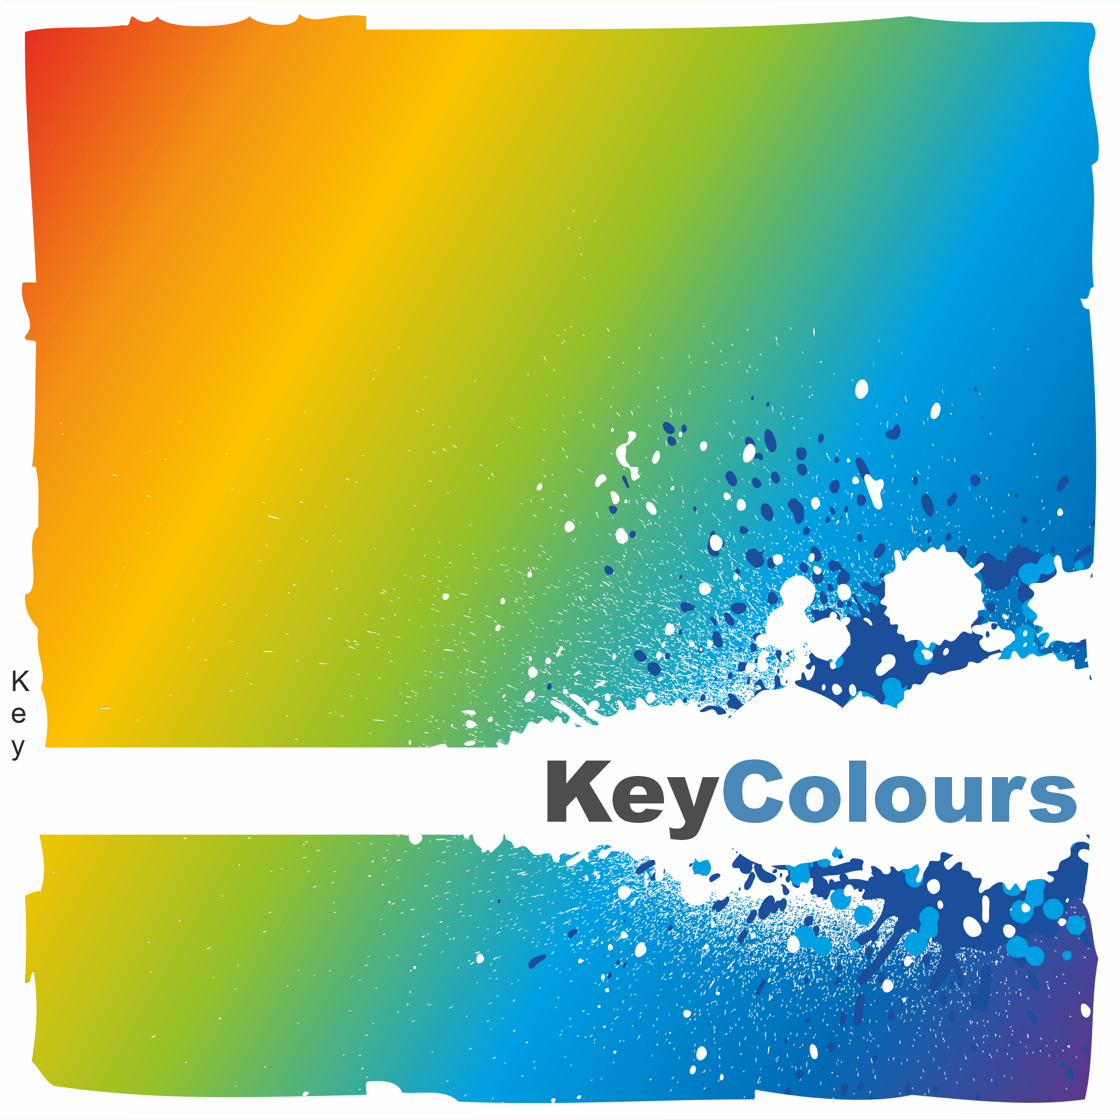 Key Colours with ColourLAB ColourBond for our uPVC Windows in Bespoke COlours